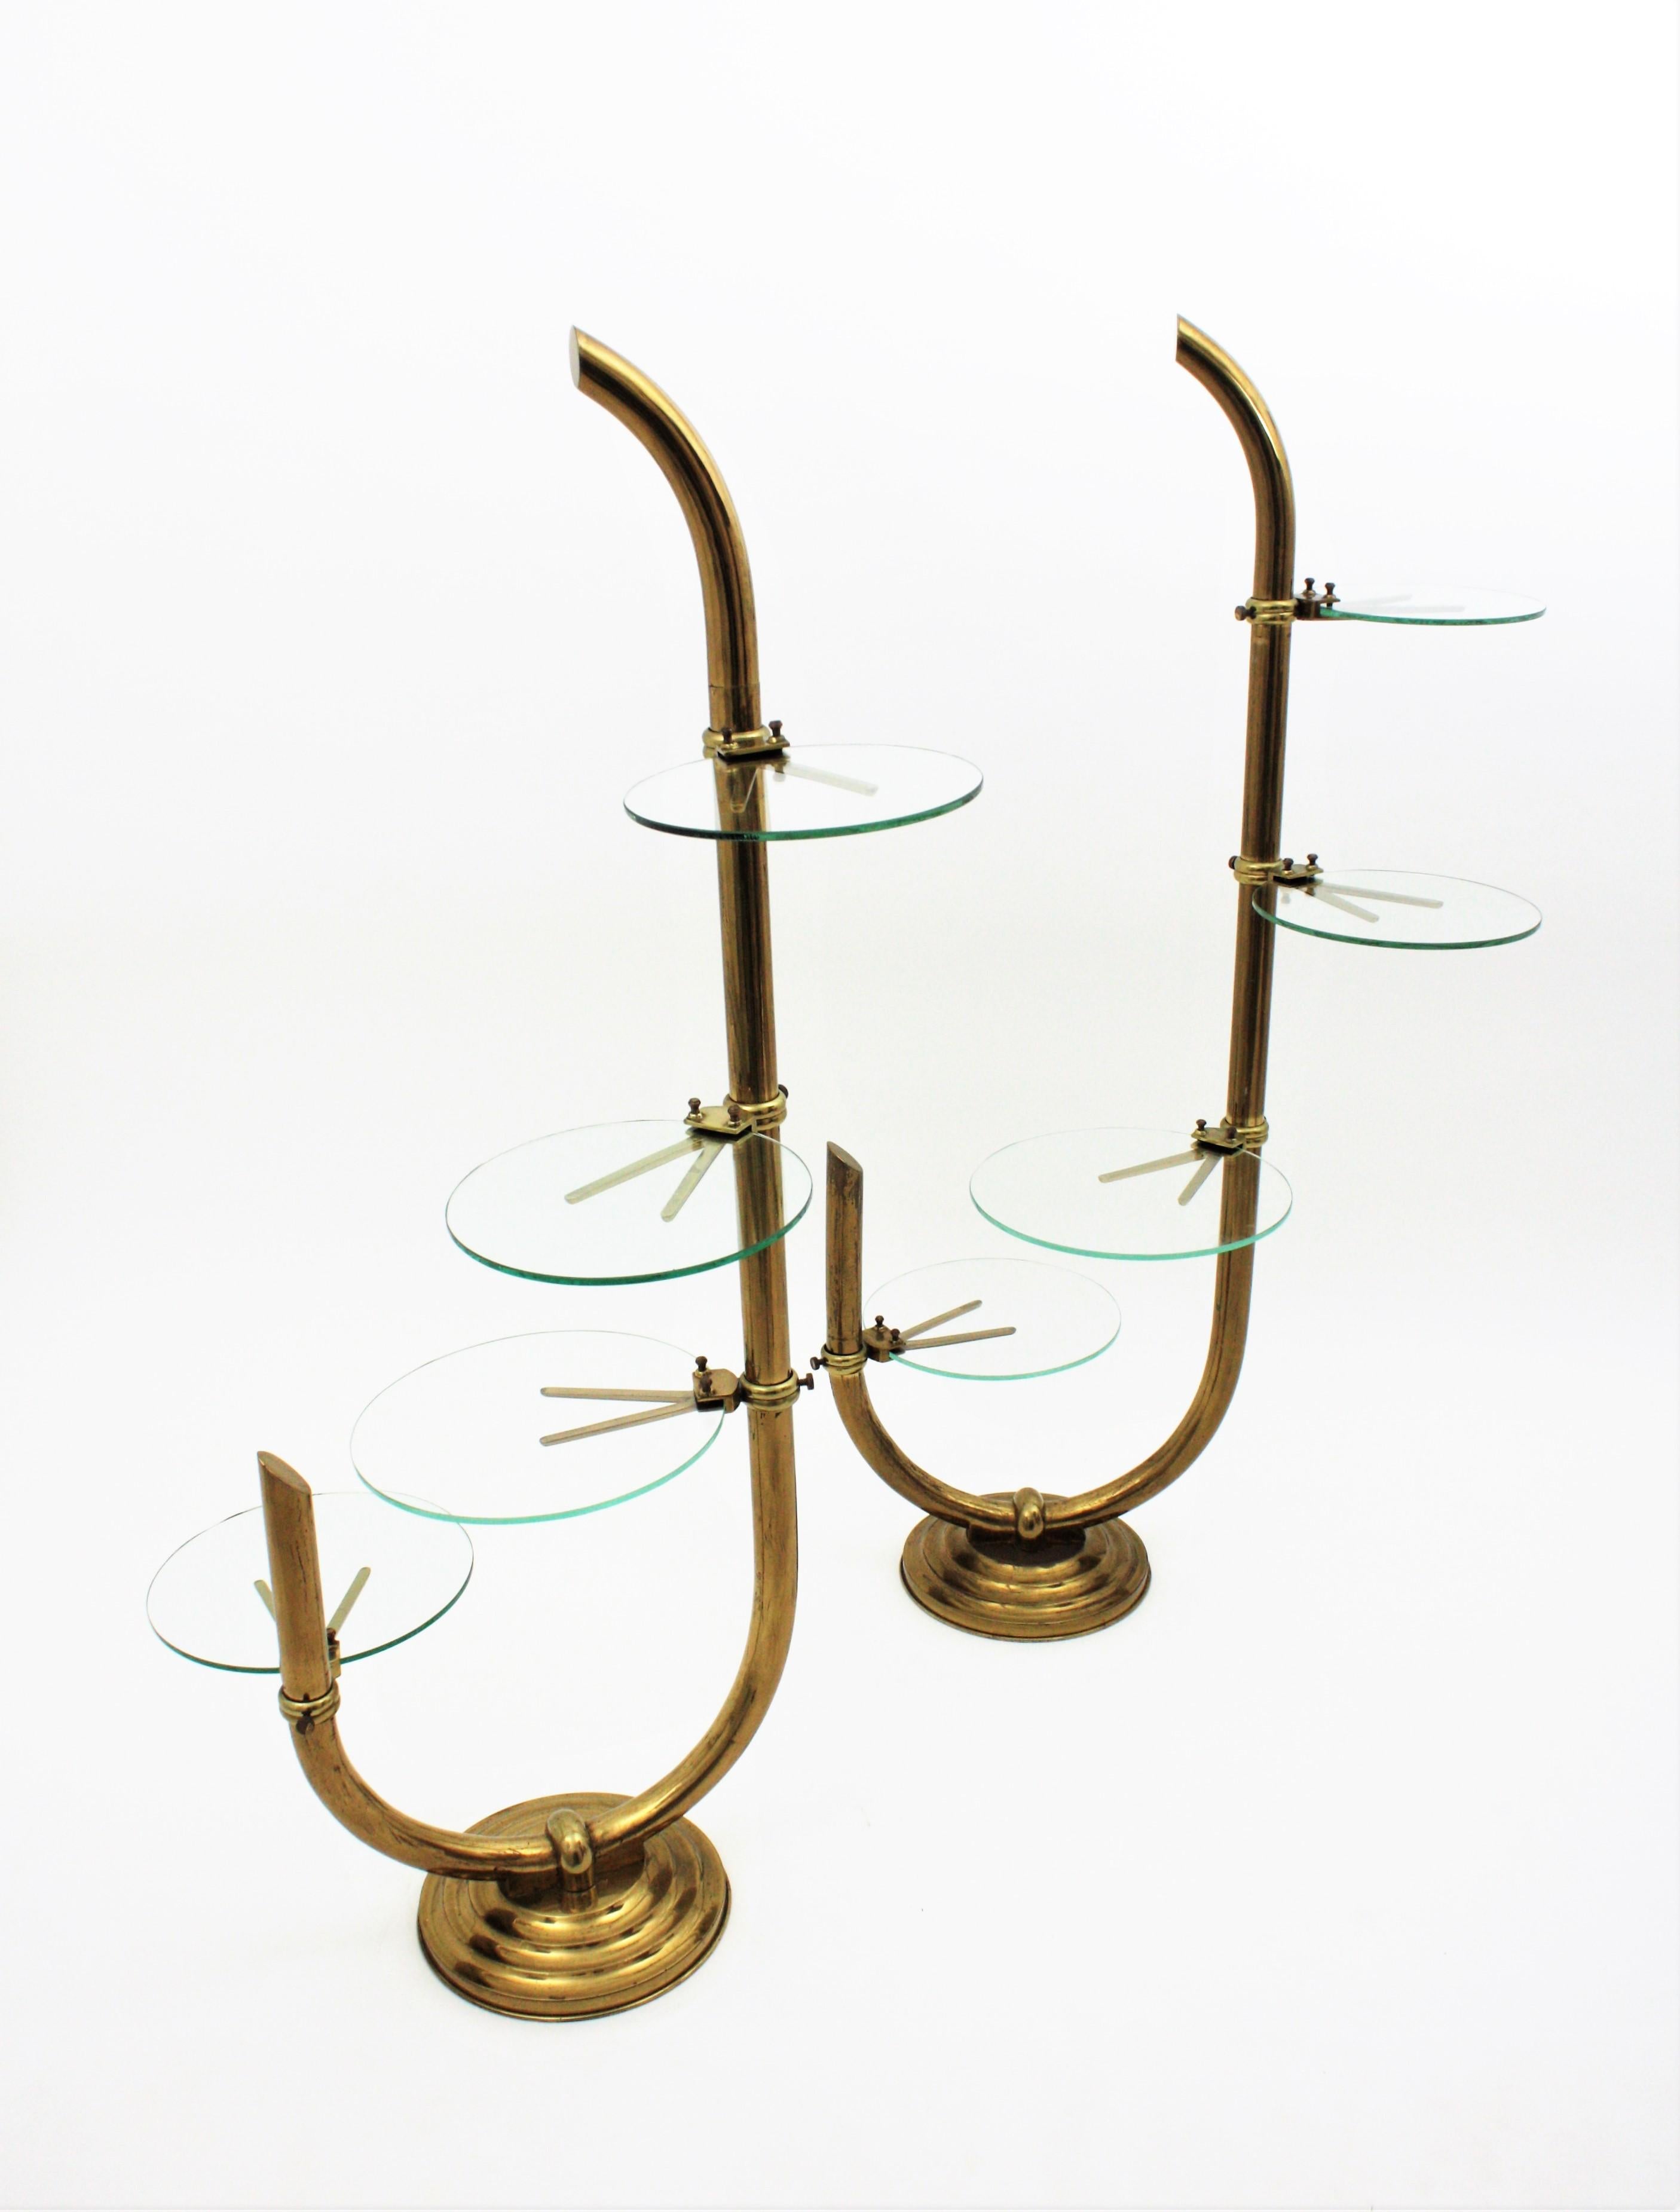 Spanish Art Deco Brass Floor Shop Display Stands / Swivel Etageres with Shelves in Glass